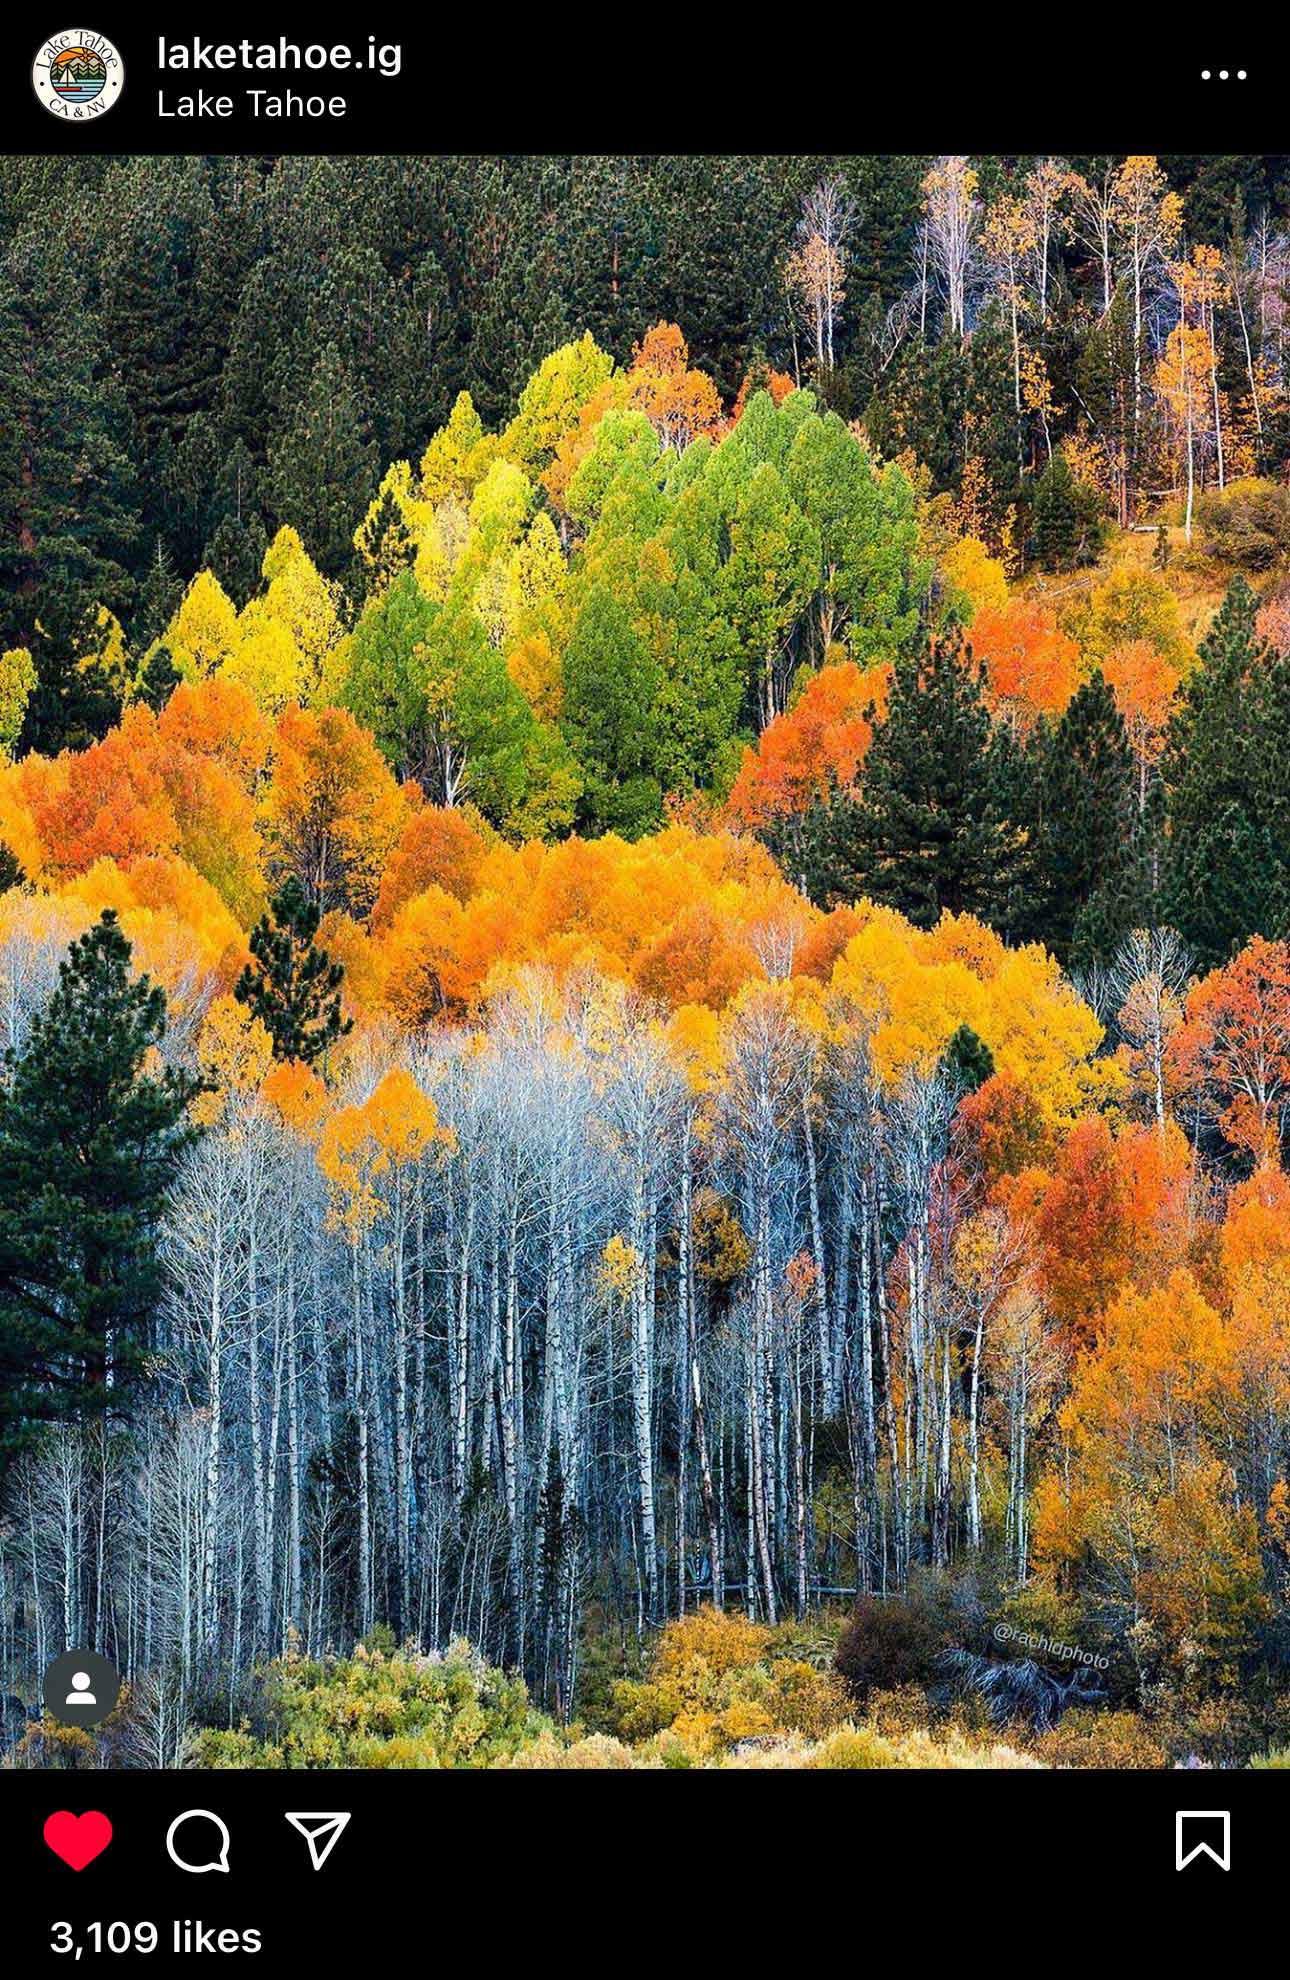 Fall colors of Aspen Trees shared by laketahoe.ig.